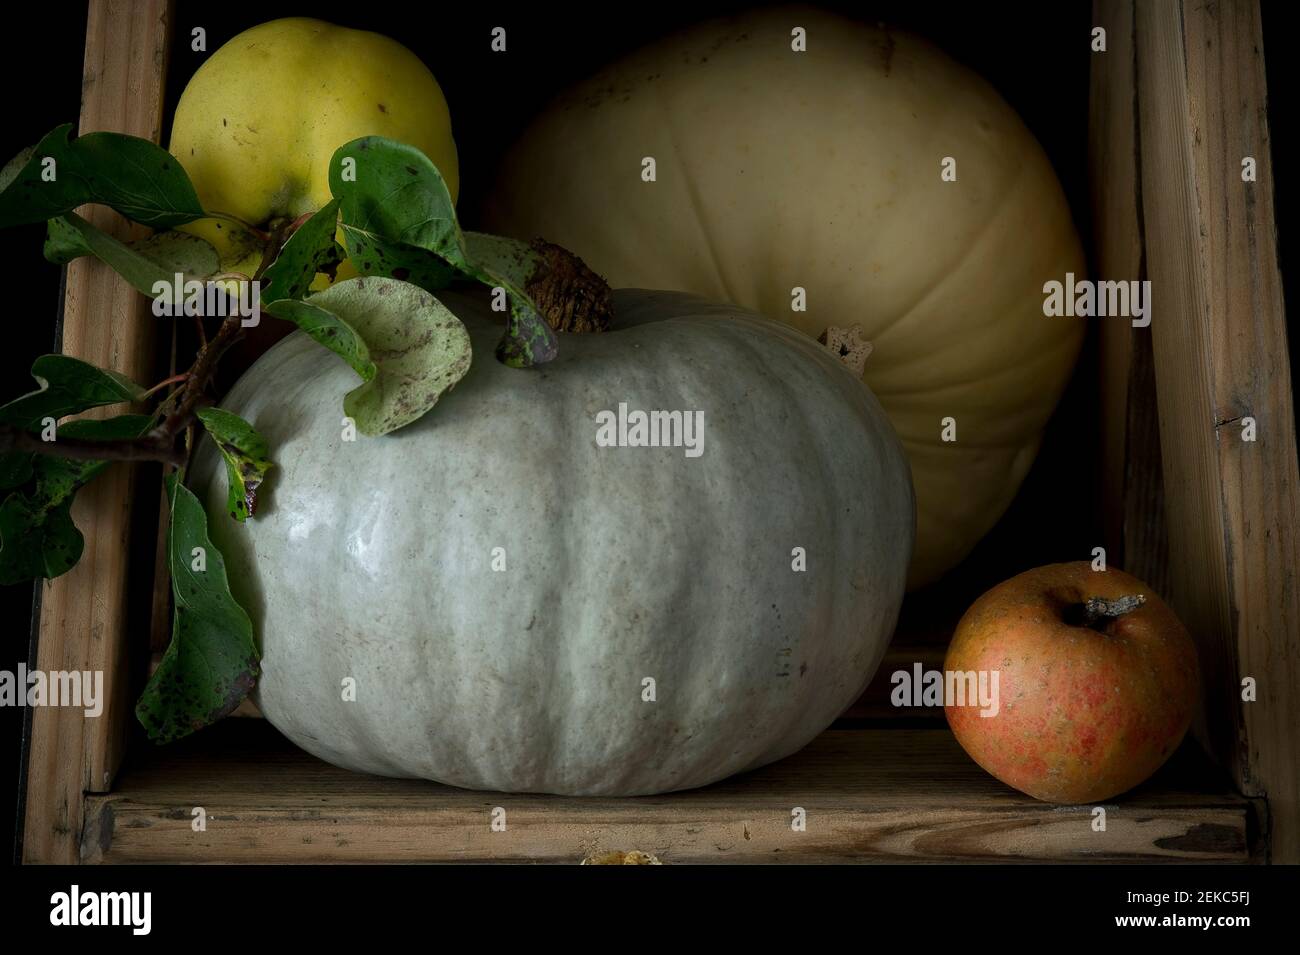 Still life of Fresh ripe apple, quince and crown prince squashes Stock Photo